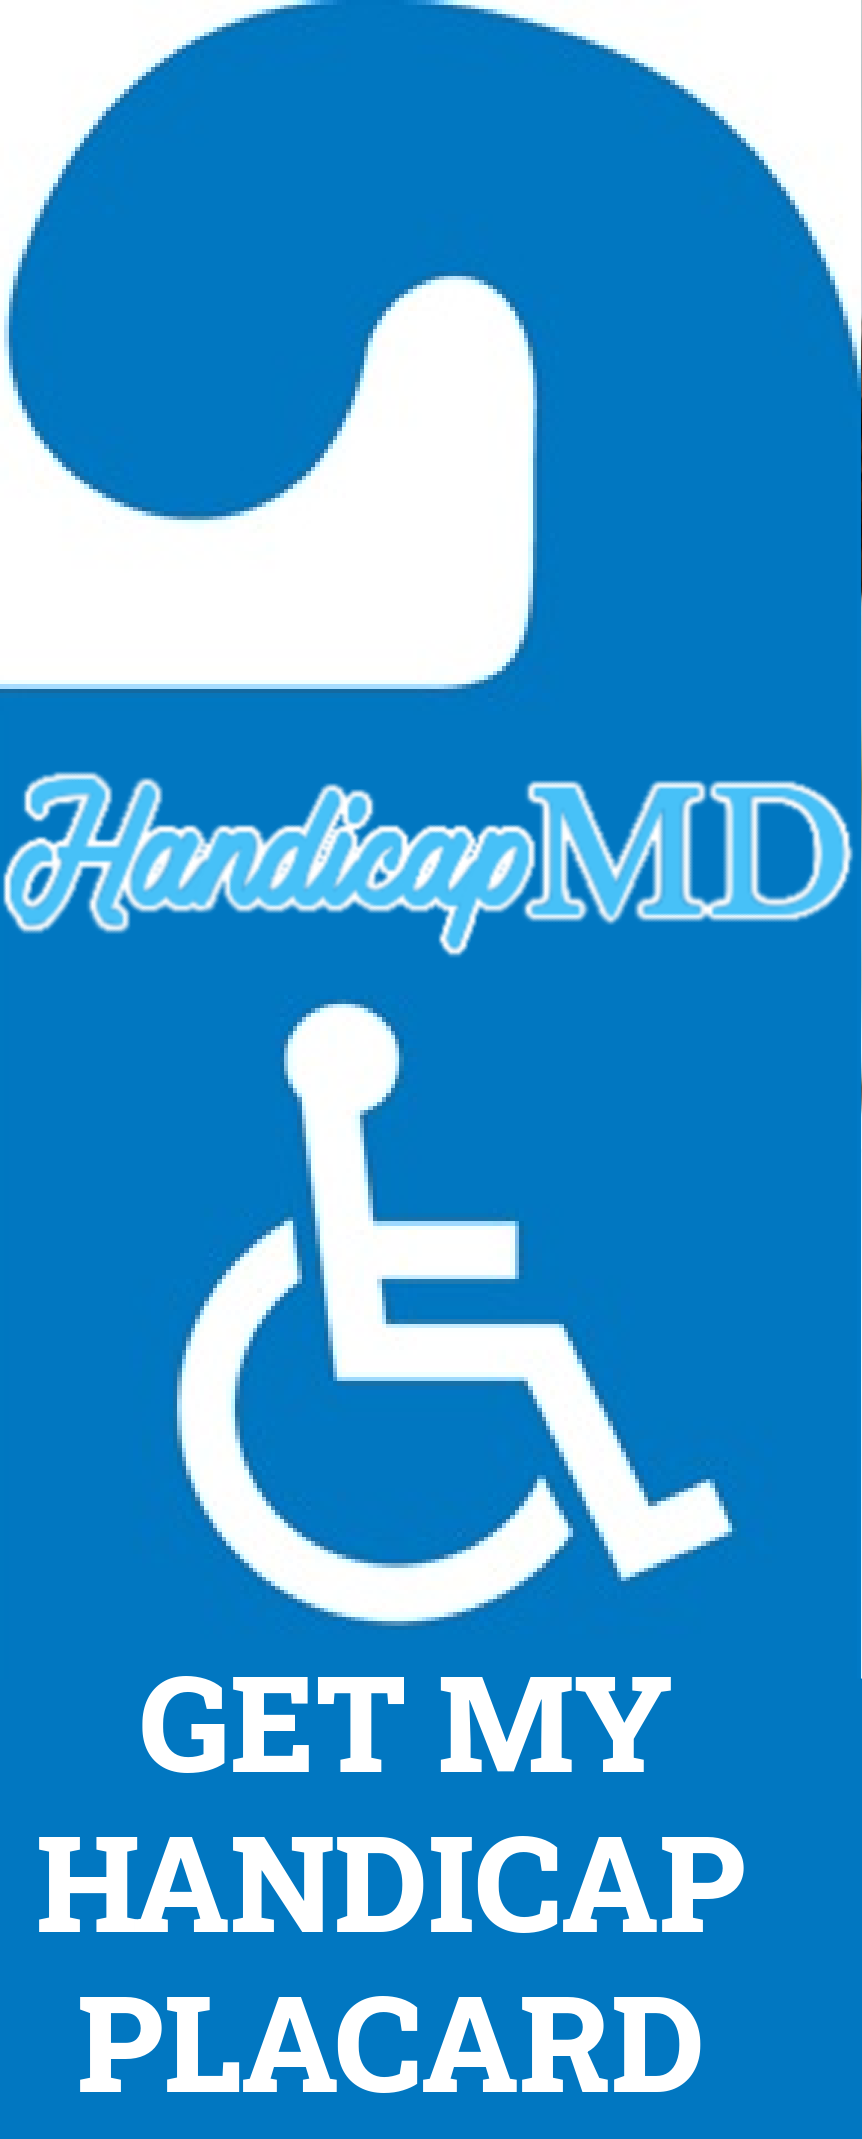 What to Do If You Suspect Someone Is Misusing an Handicap Parking Space